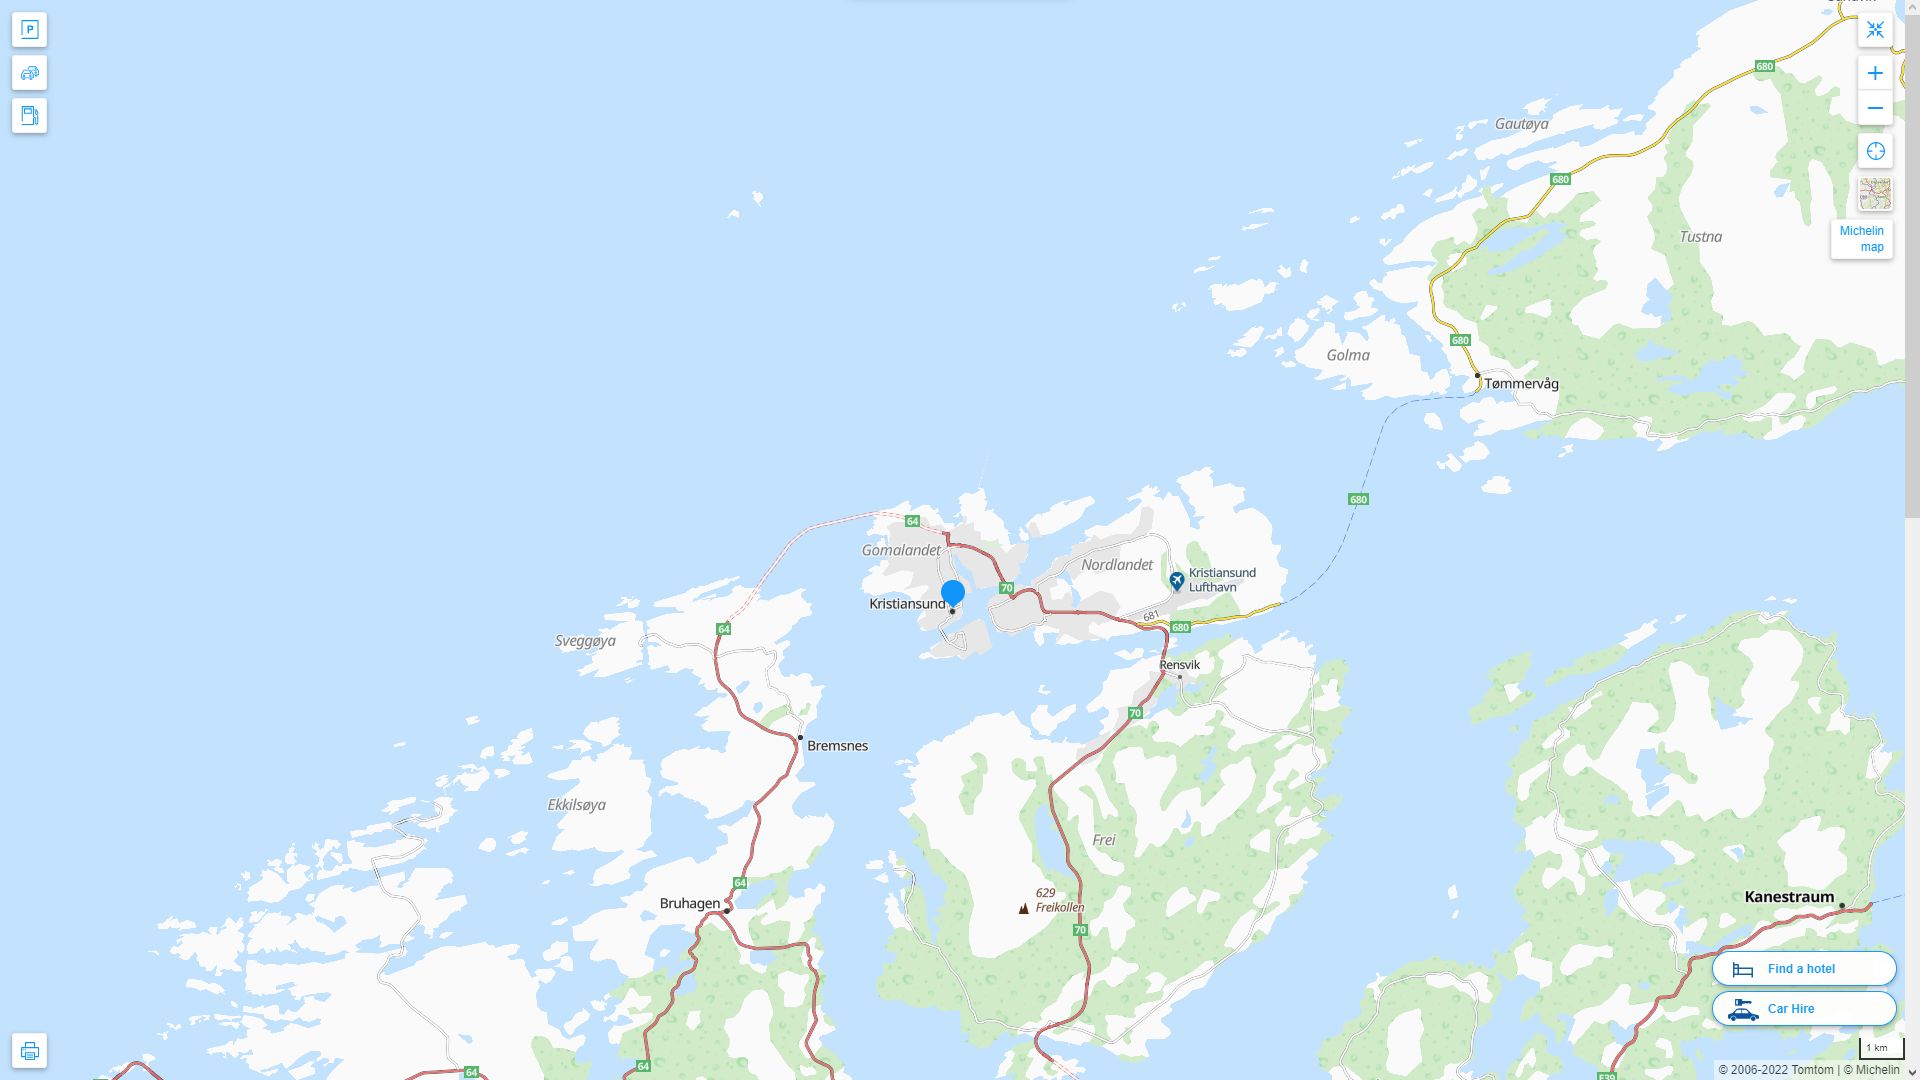 Kristiansund Highway and Road Map